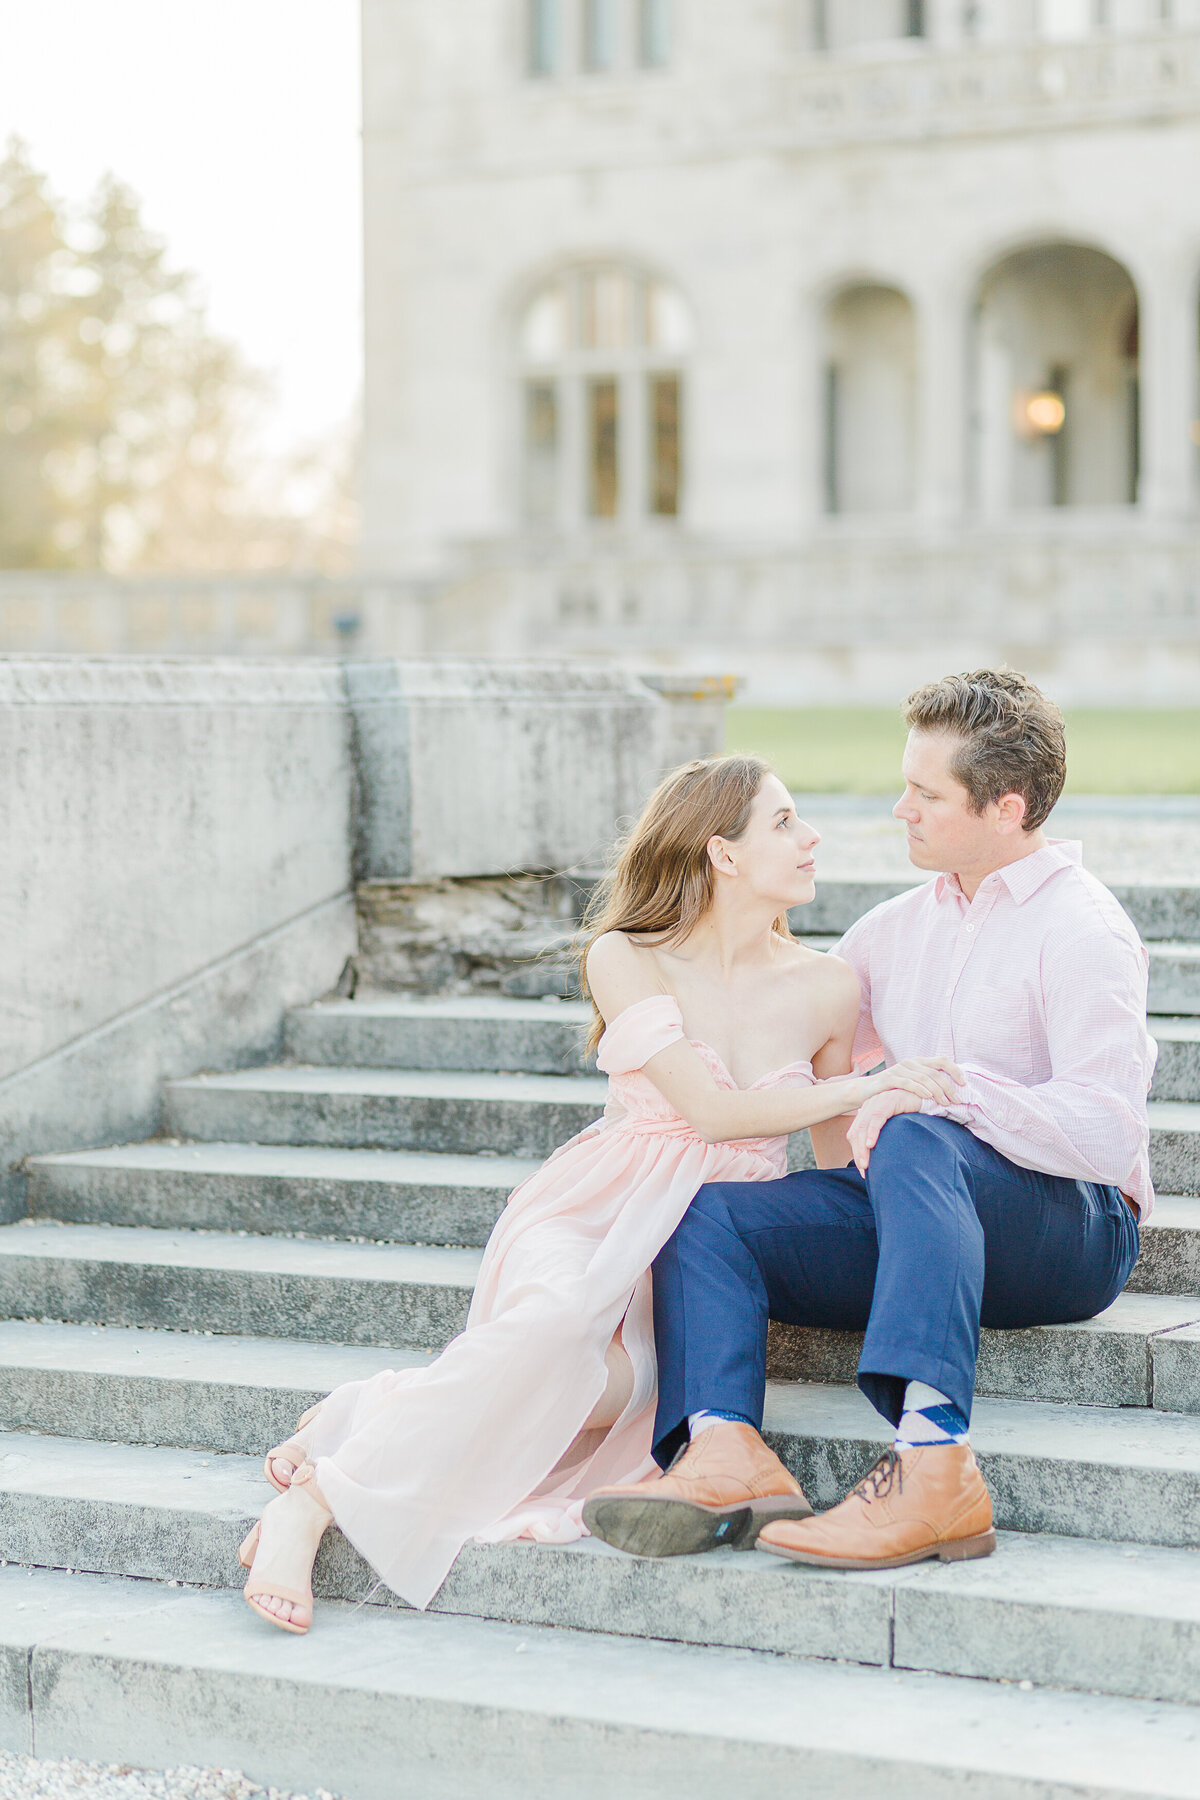 Man and woman sit on the stone steps at Salve Regina. The man is on the step higher than the woman. She is leaning on his lap and looking over at him. The stone buildings are featured prominently in the background. Captured by best RI wedding photographer Lia Rose Weddings